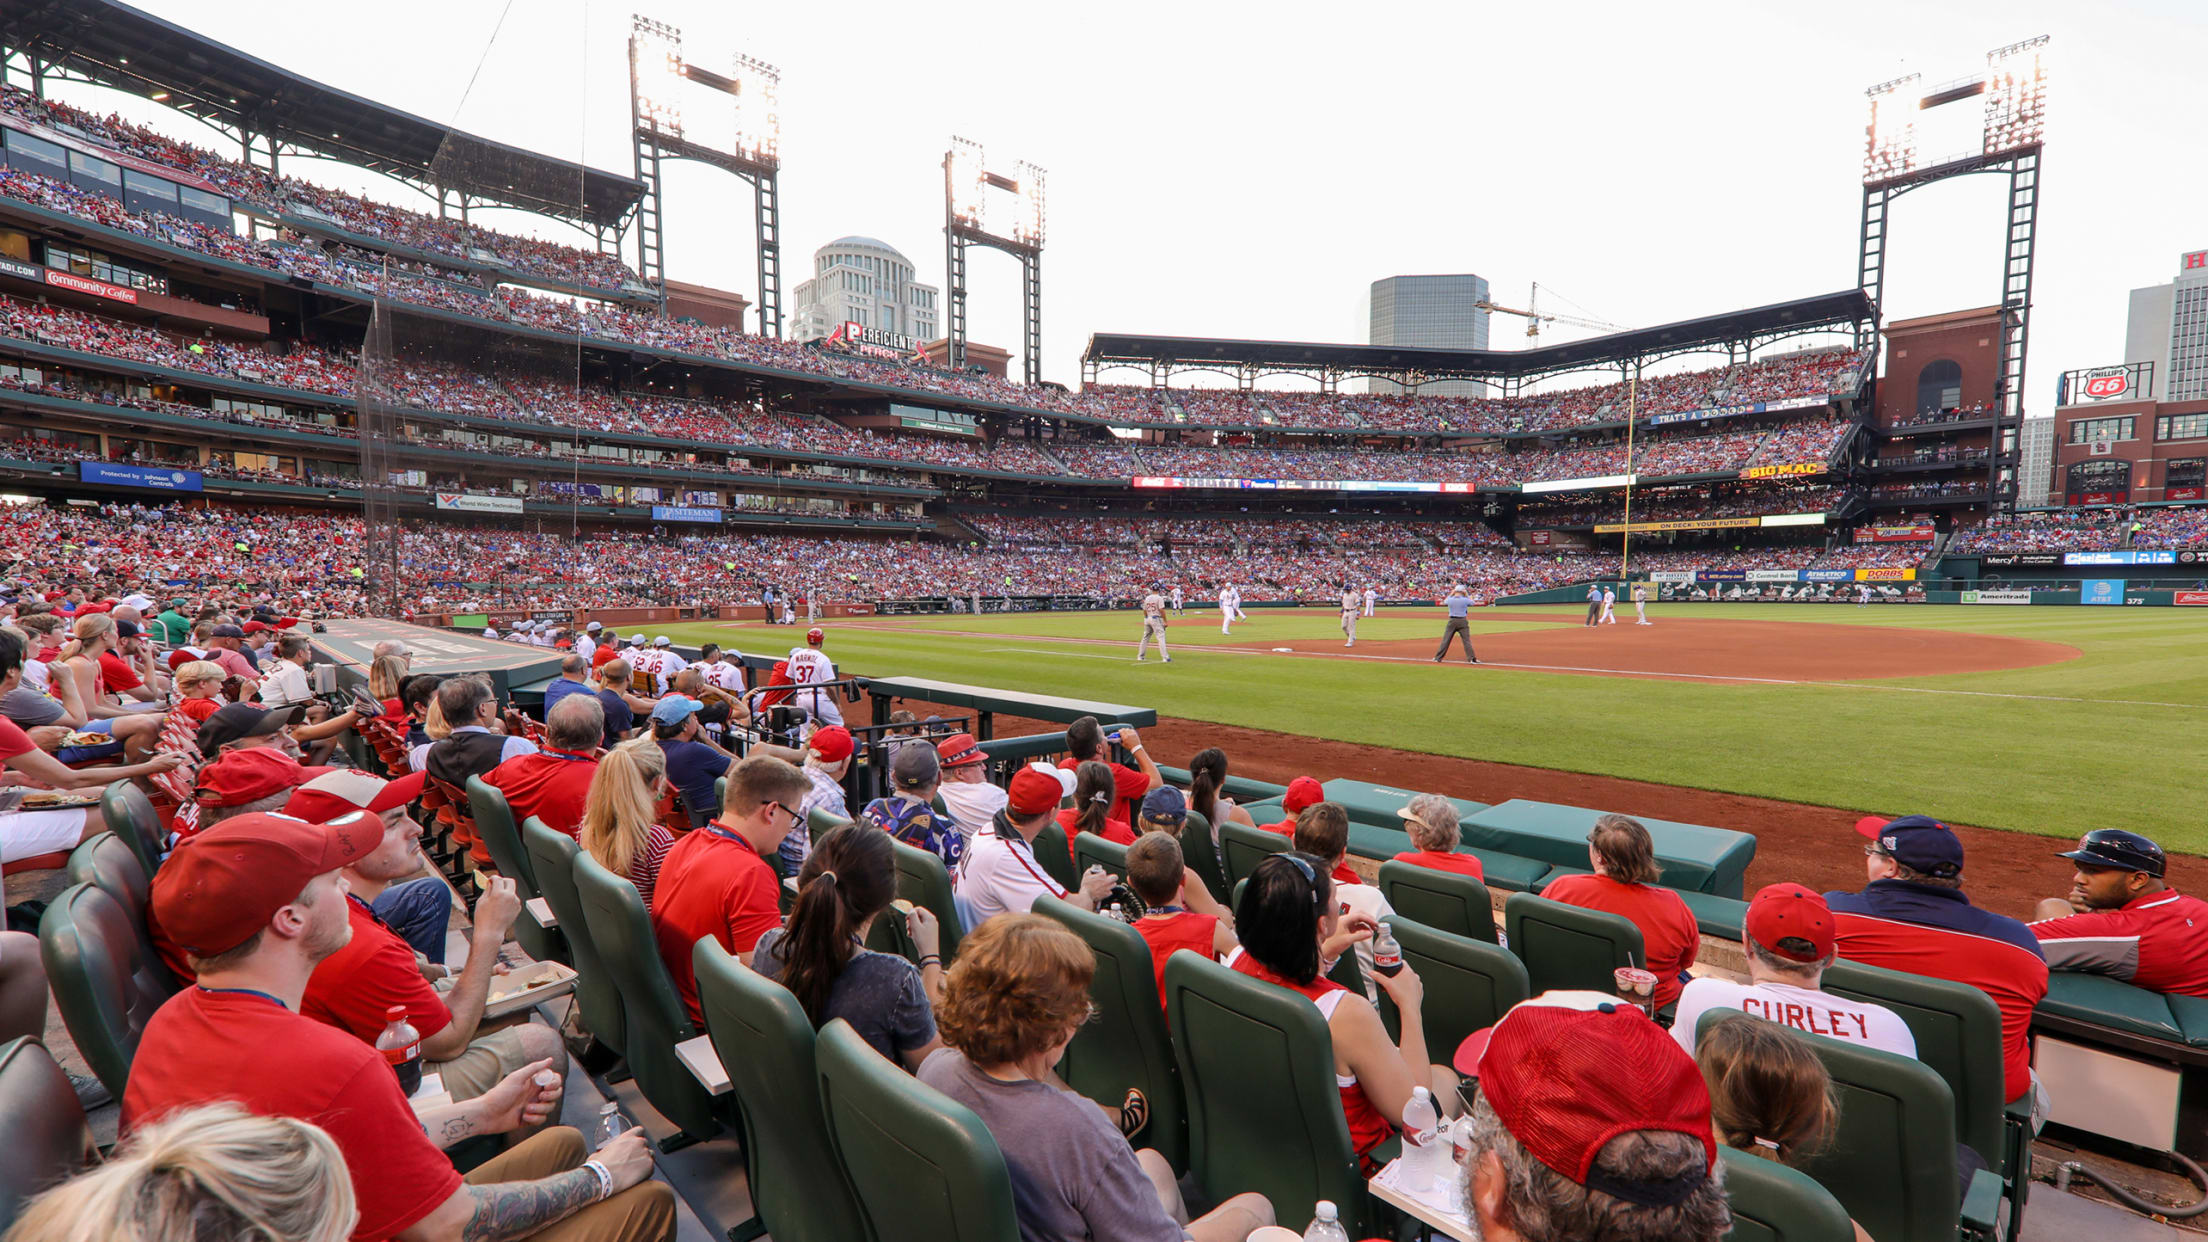 New features at Busch Stadium include all-inclusive area, play